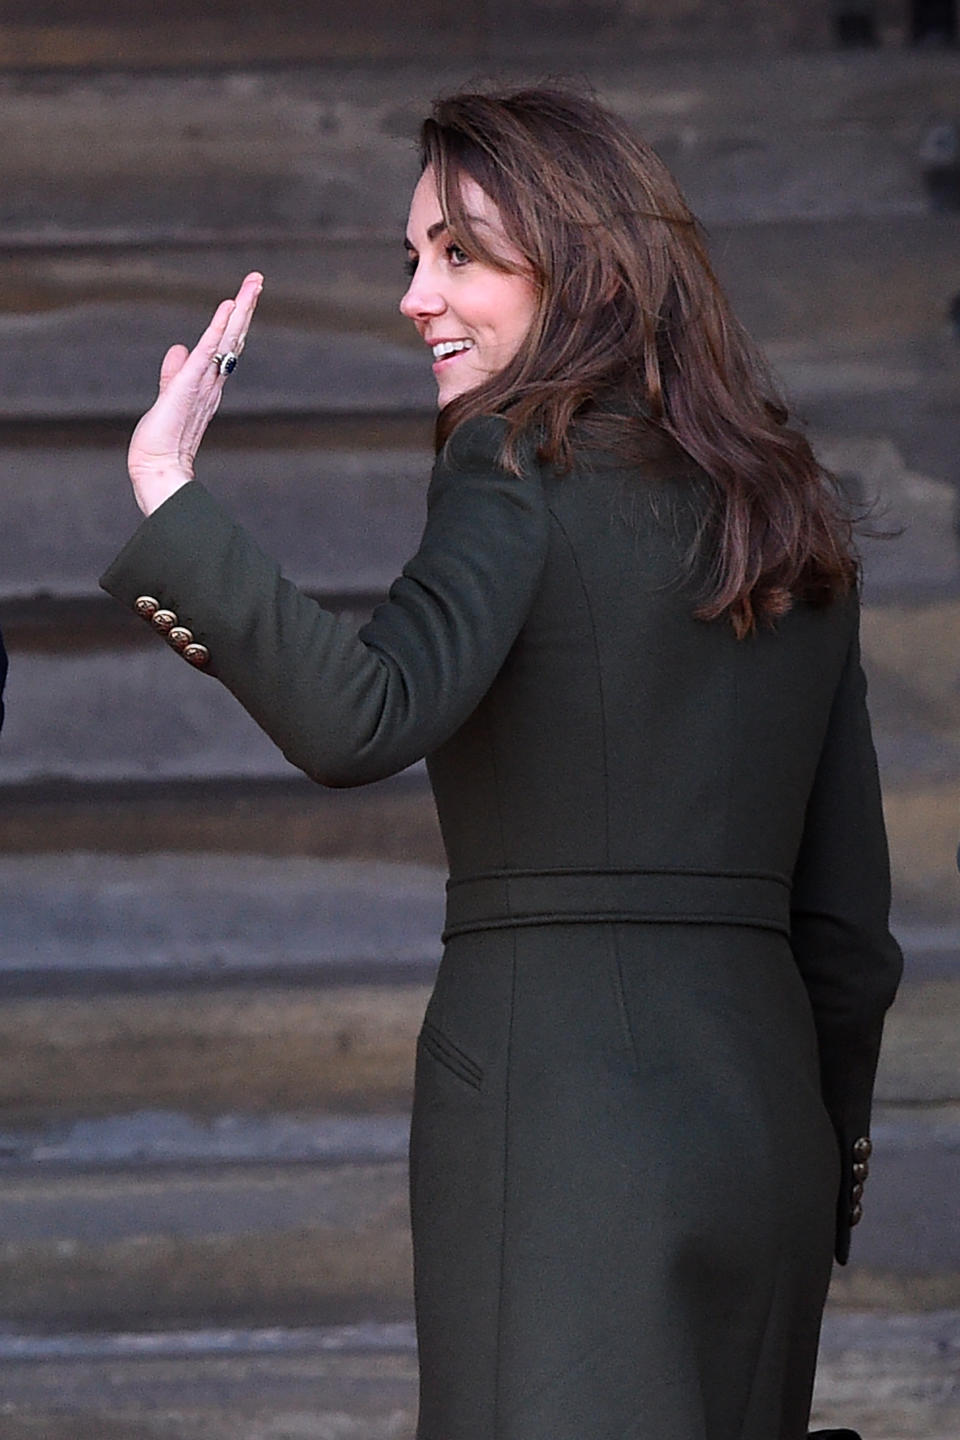 Britain's Catherine, Duchess of Cambridge gestures on arrival for a visit to City Hall in Centenary Square, Bradford on January 15, 2020, to meet young people and hear about their life in Bradford. (Photo by Oli SCARFF / AFP) (Photo by OLI SCARFF/AFP via Getty Images)